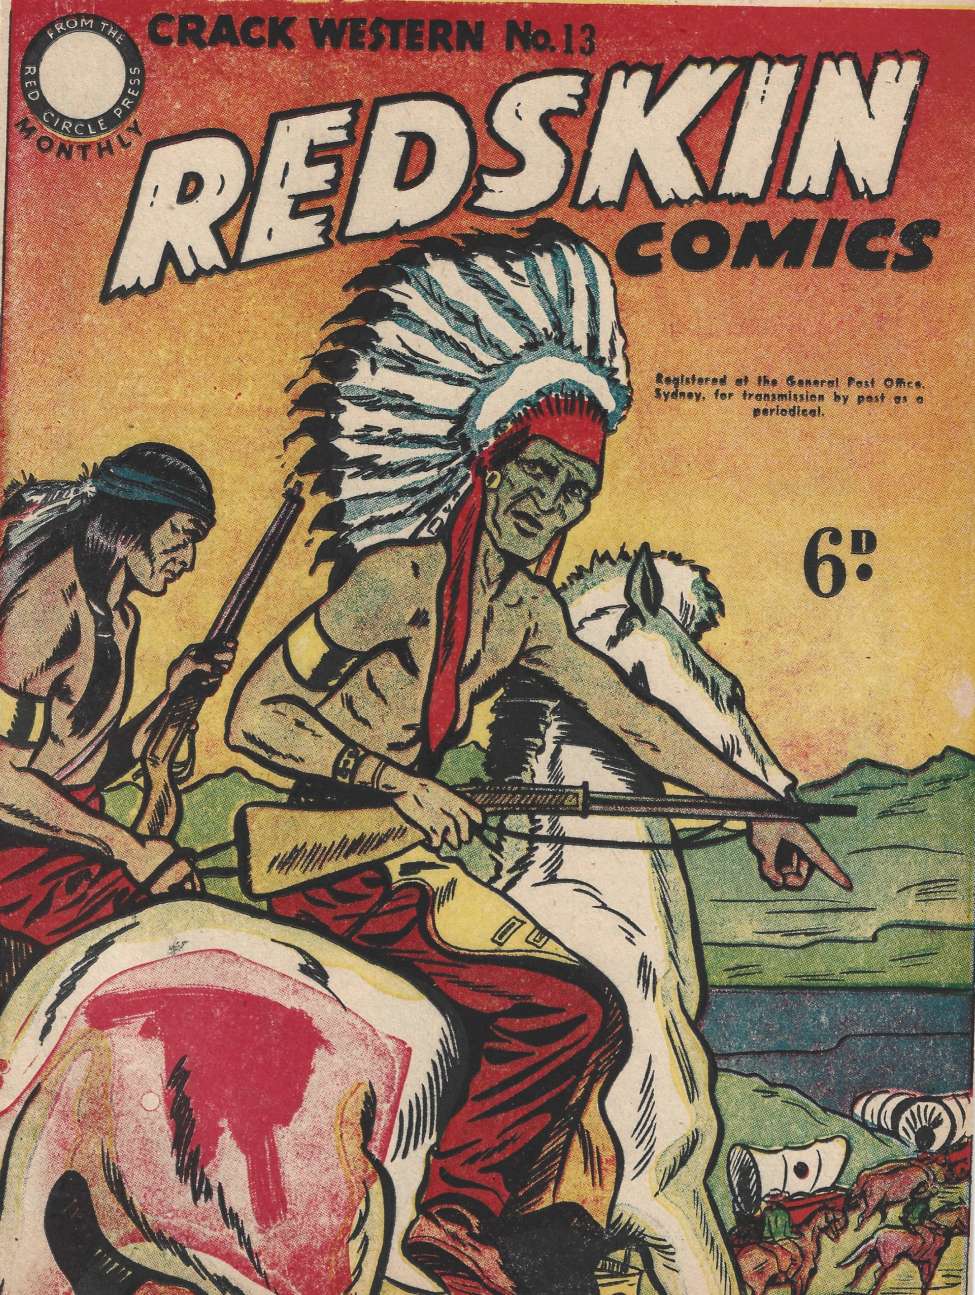 Book Cover For Crack Western 13 - Redskin Comics